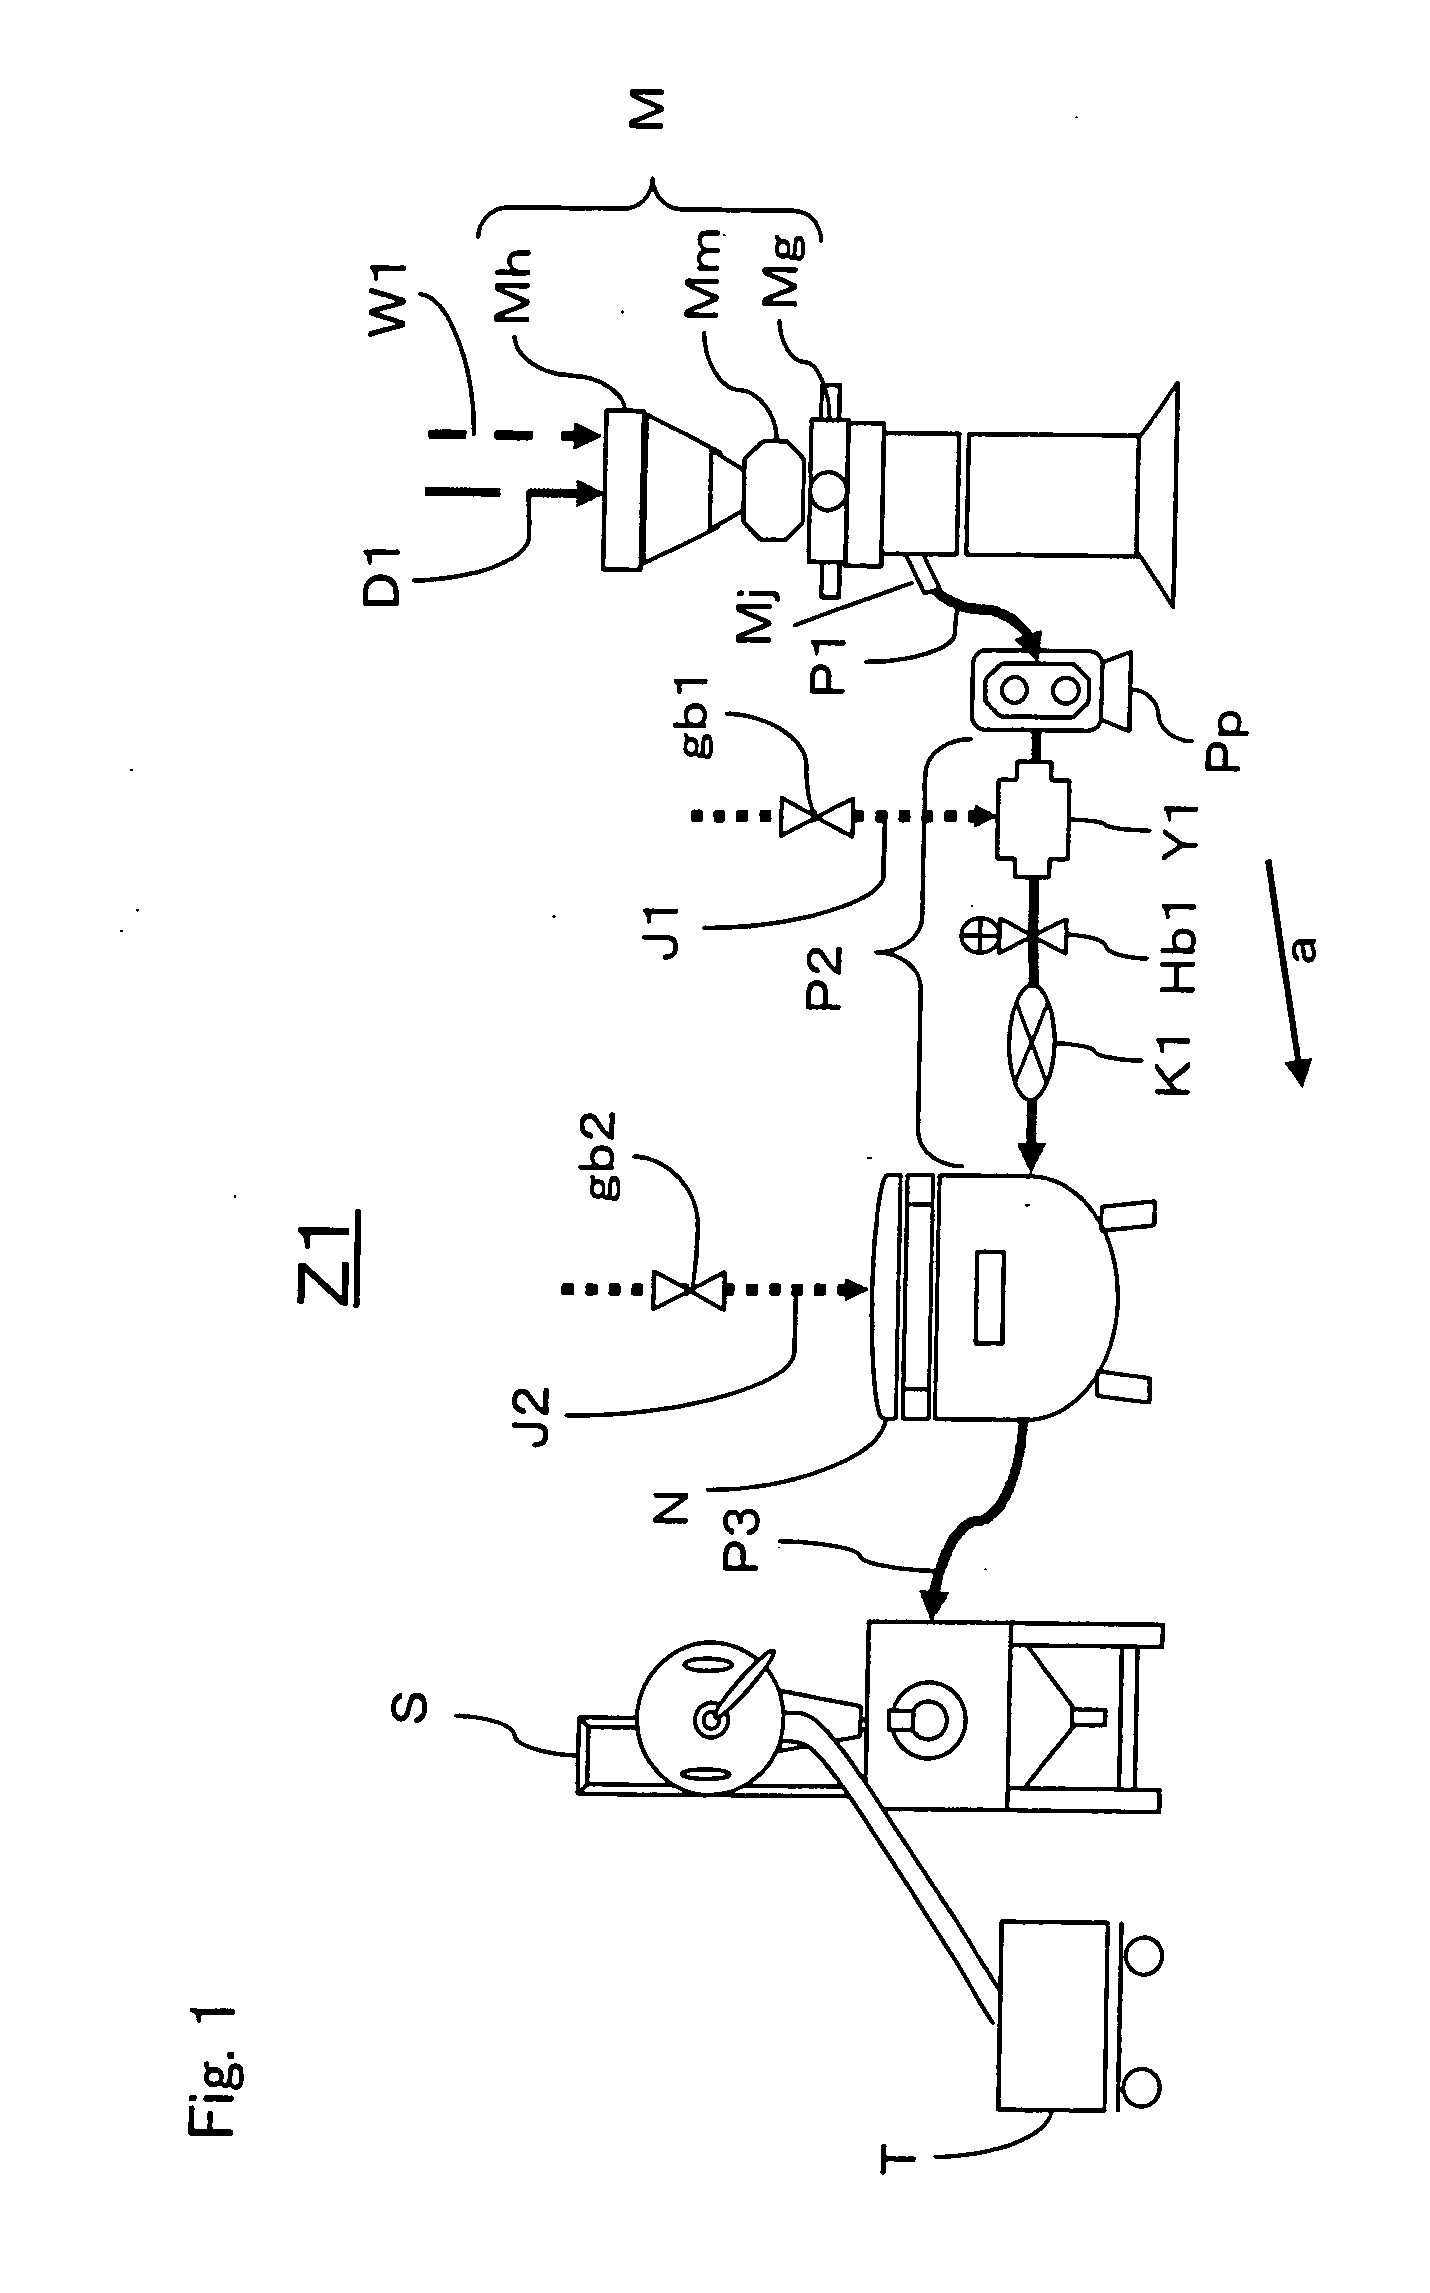 Process for producing soy milk and apparatus for producing soy milk